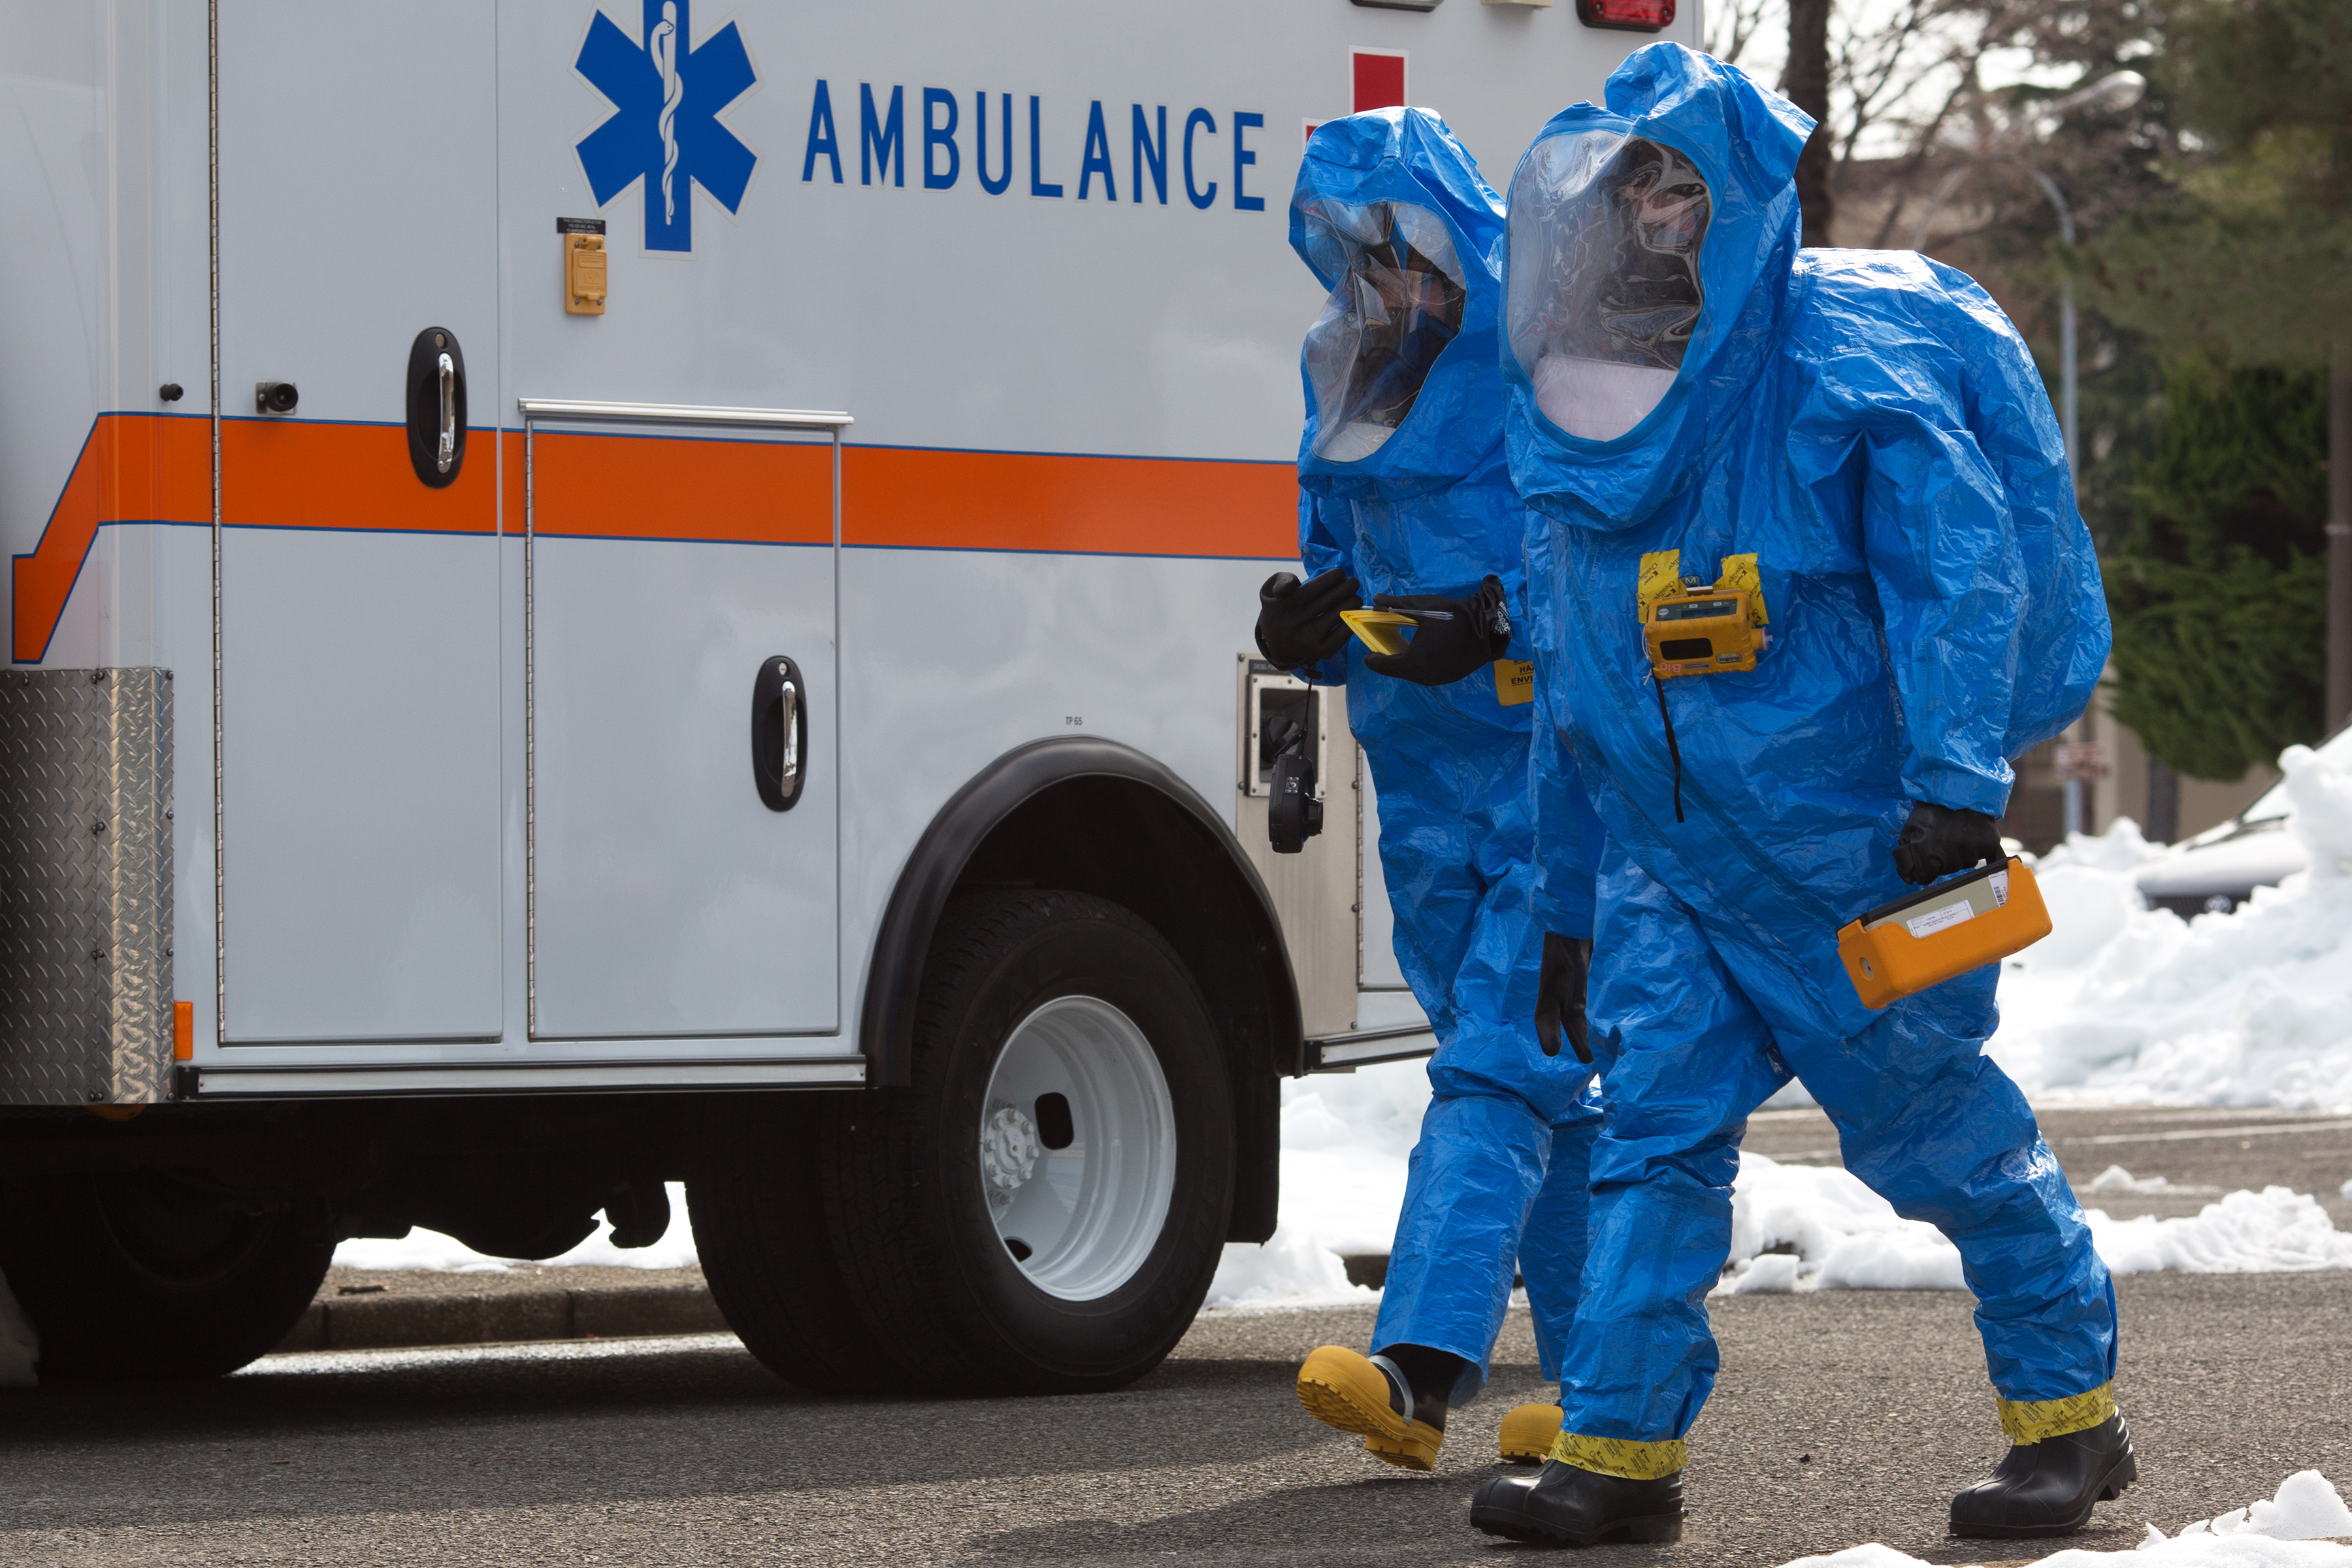 Emergency Live | Emergency responders on crime scenes - 6 Most common mistakes image 2